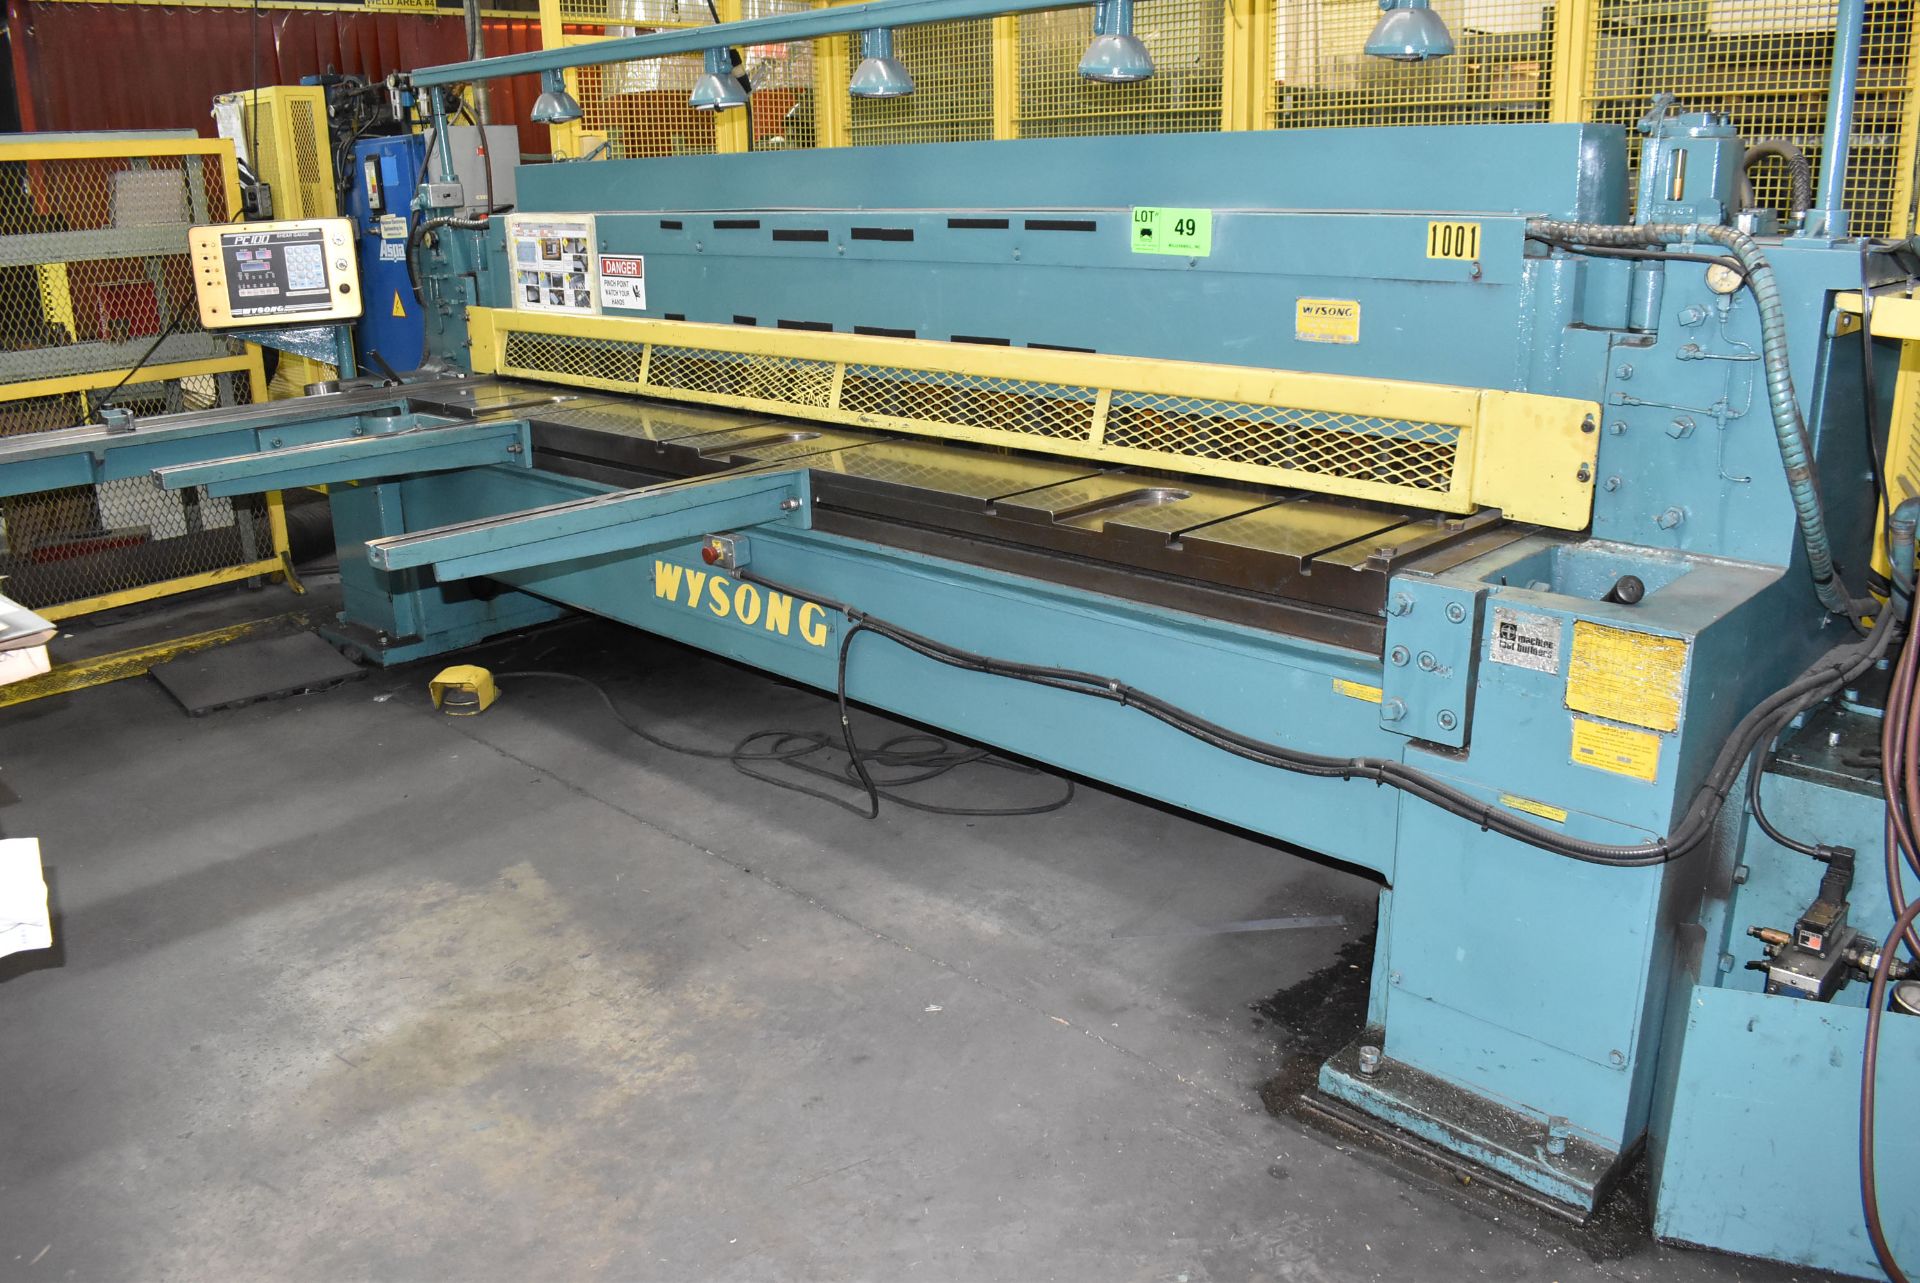 WYSONG 1025 10' MECHANICAL SHEAR WITH 1/4" CAPACITY, WYSONG PC100 CONTROL, STEELTECH MACHINERY - Image 3 of 5